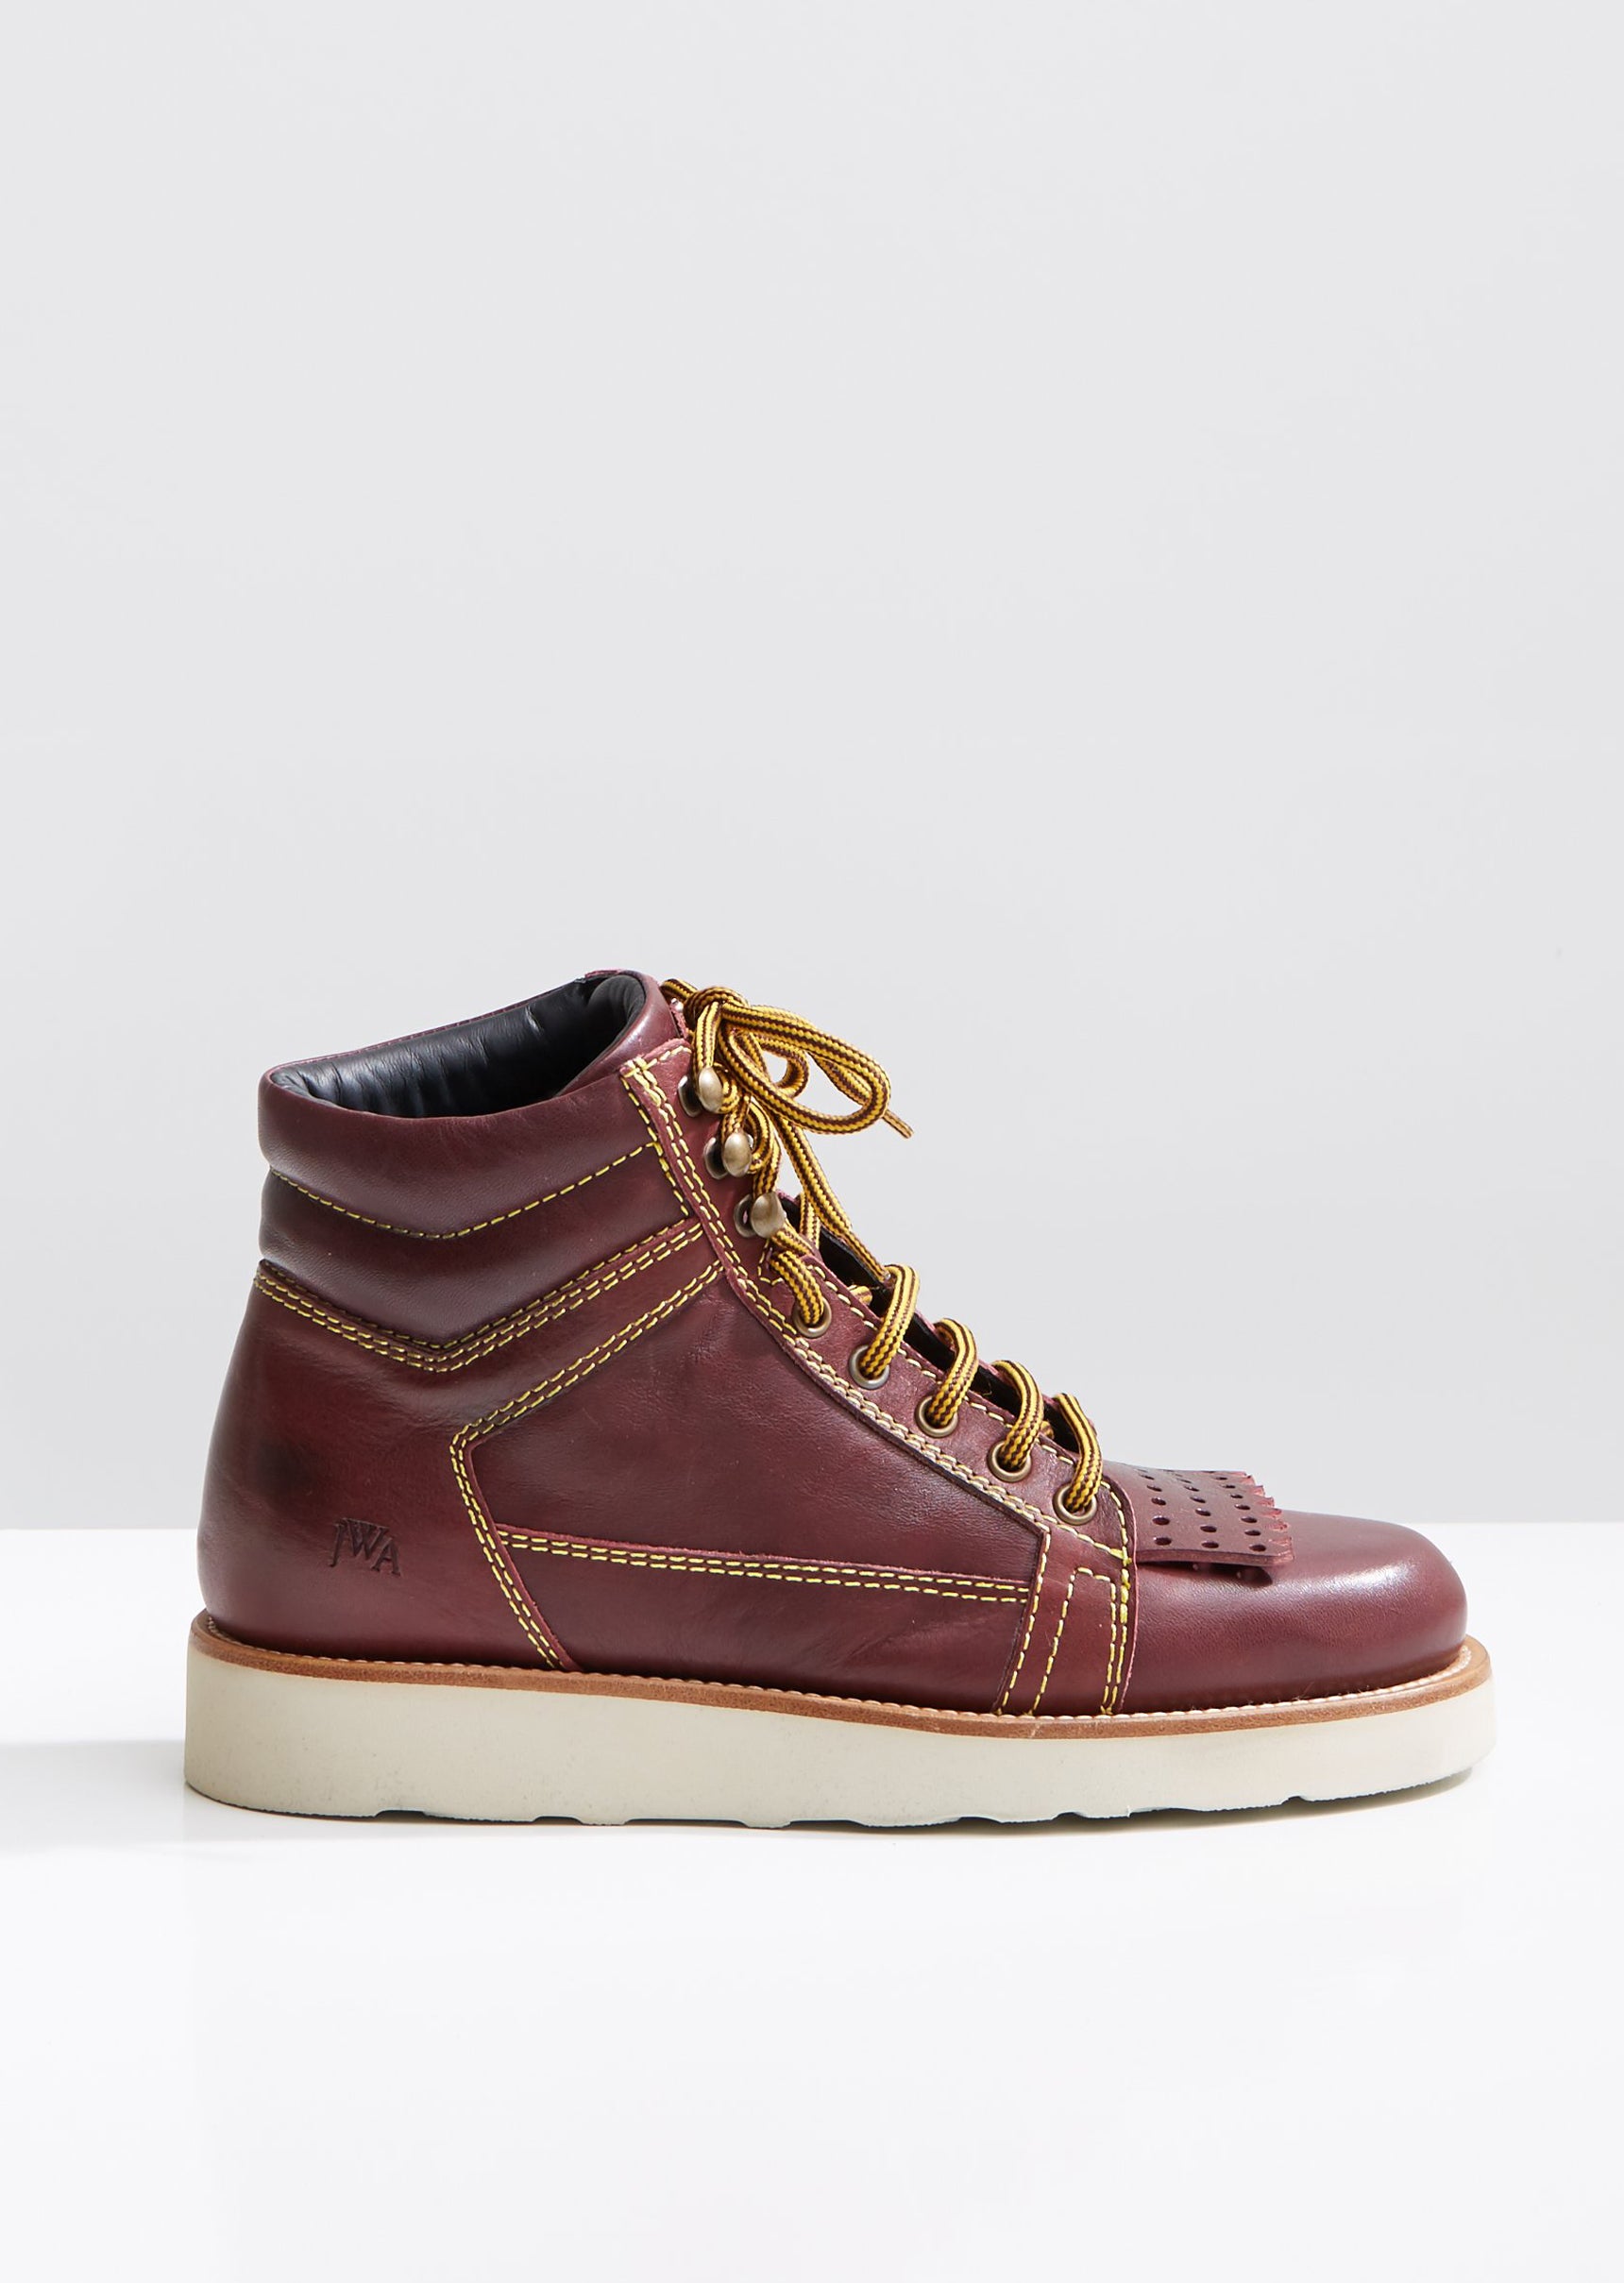 jw anderson hiking boots